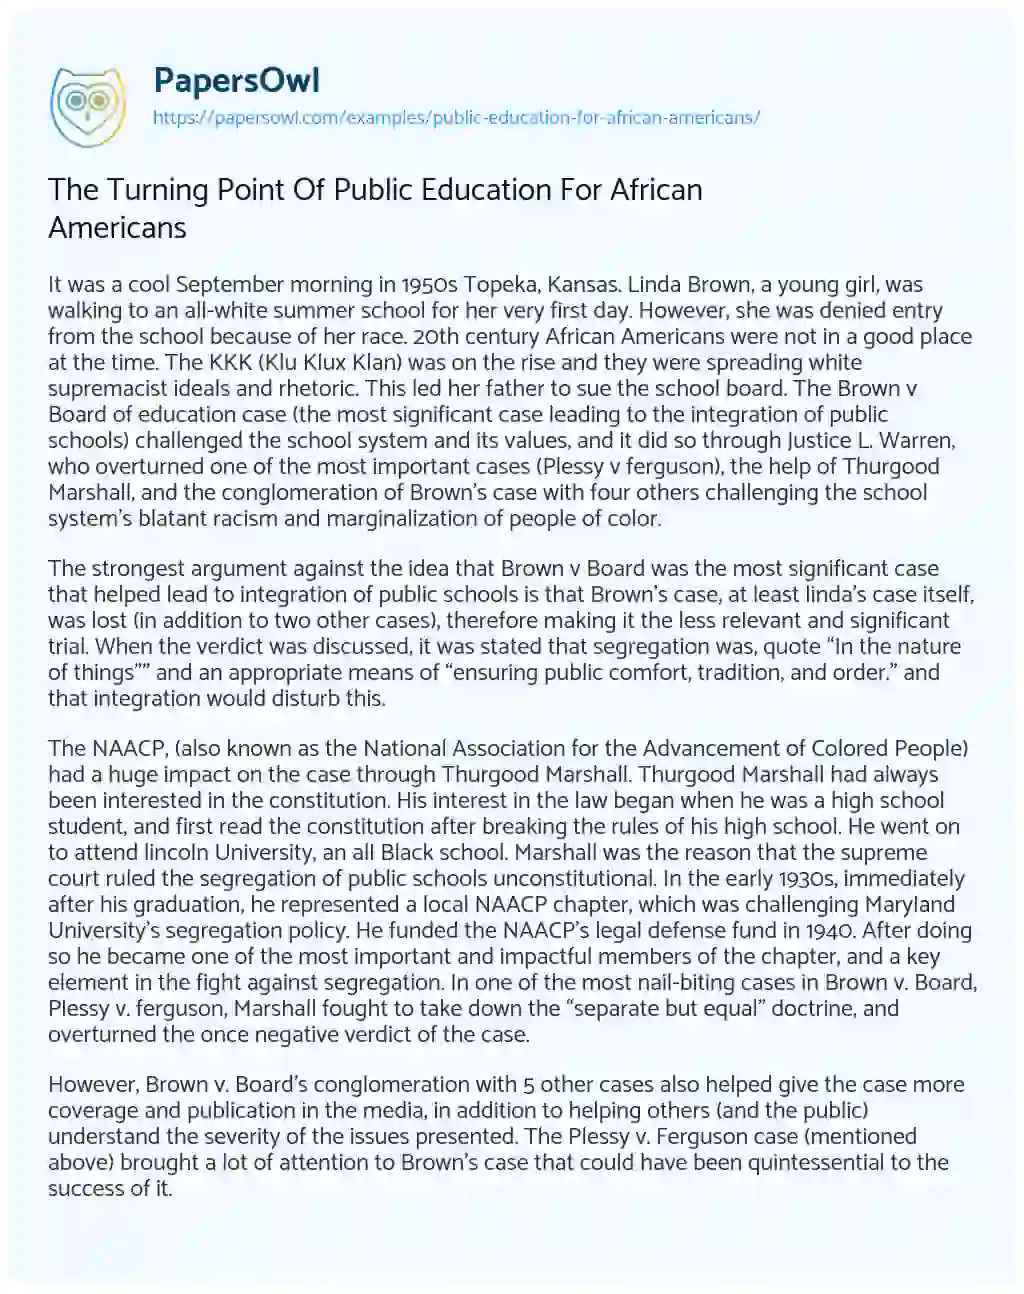 Essay on The Turning Point of Public Education for African Americans